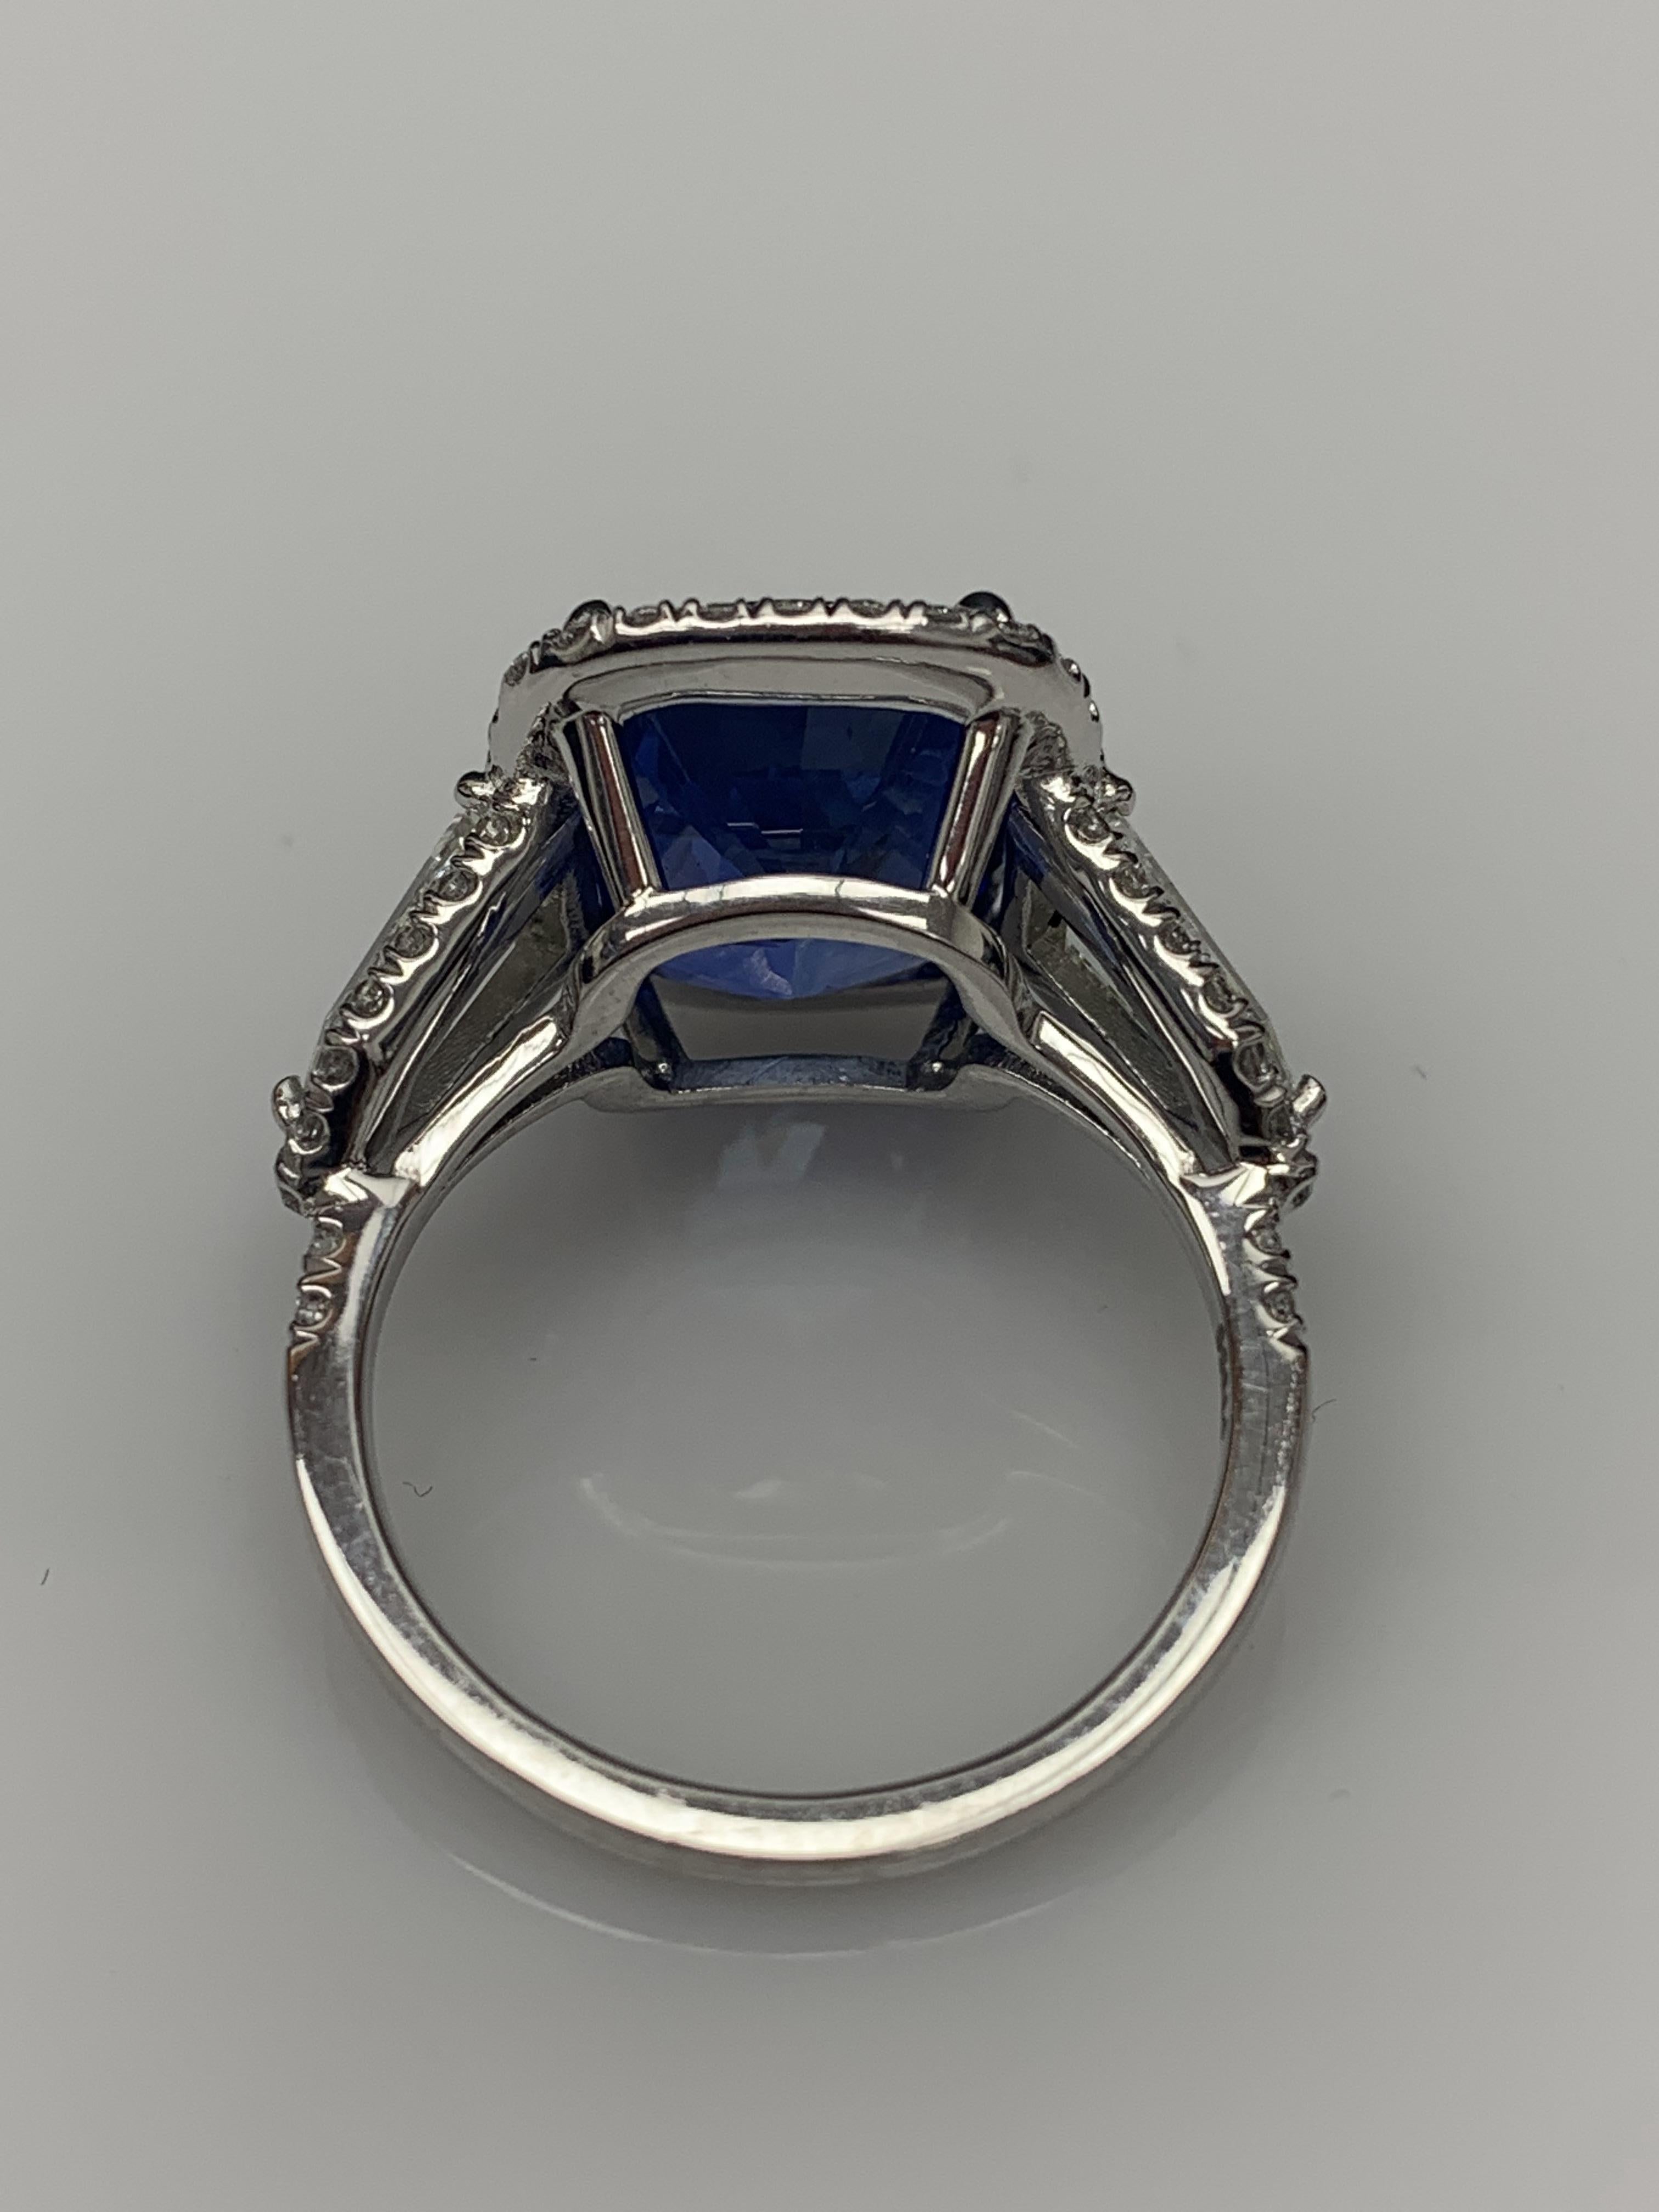 7.51 Carat Cushion Cut Sapphire and Diamond Engagement Ring in Platinum For Sale 3